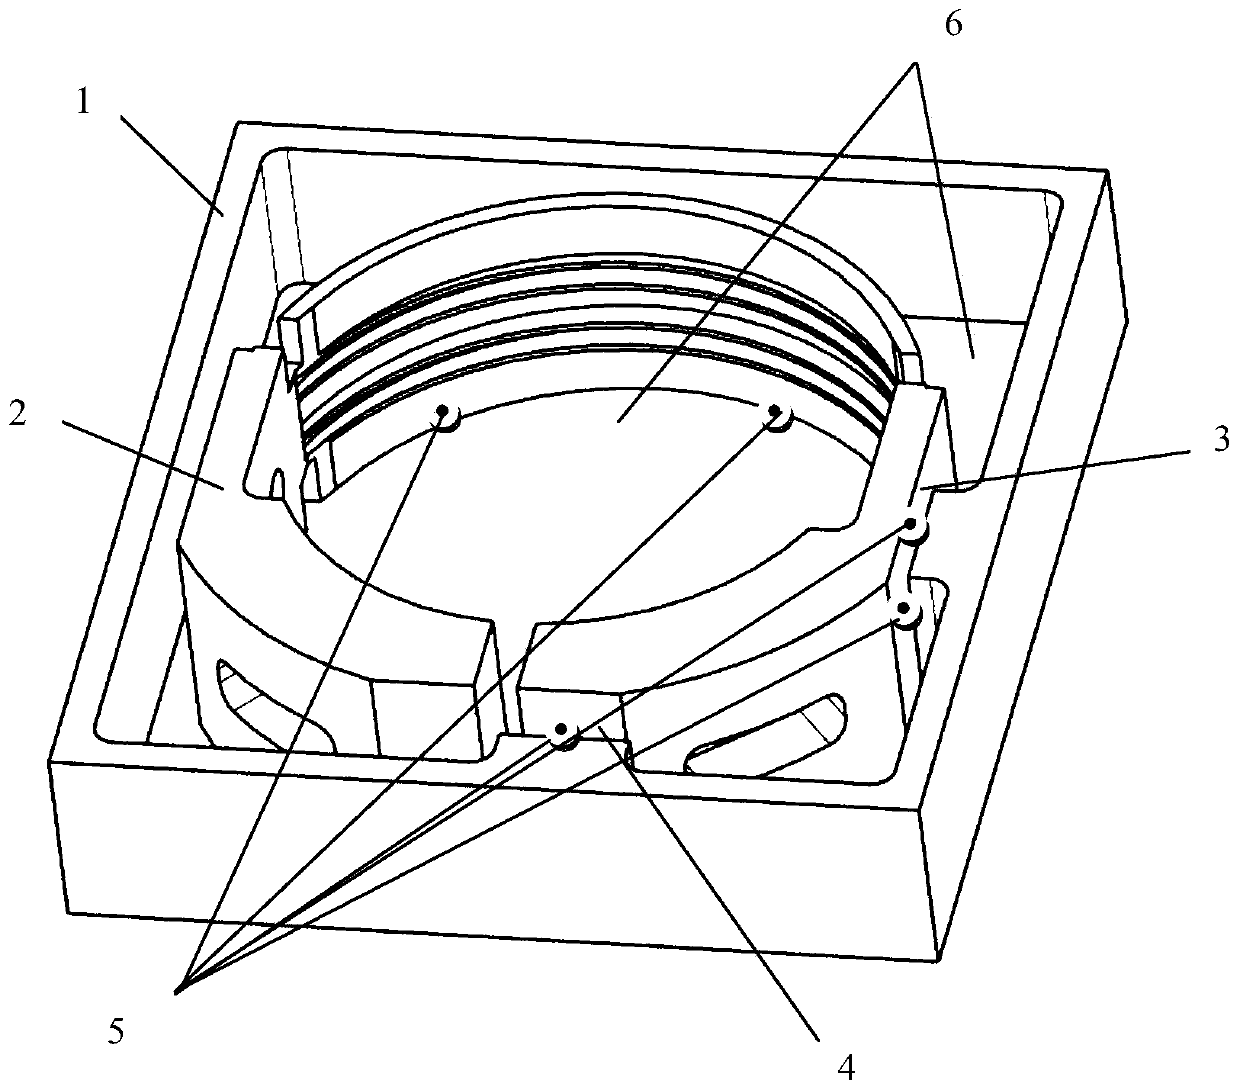 Stress-free clamping method for datum plane machining of open thin-walled part